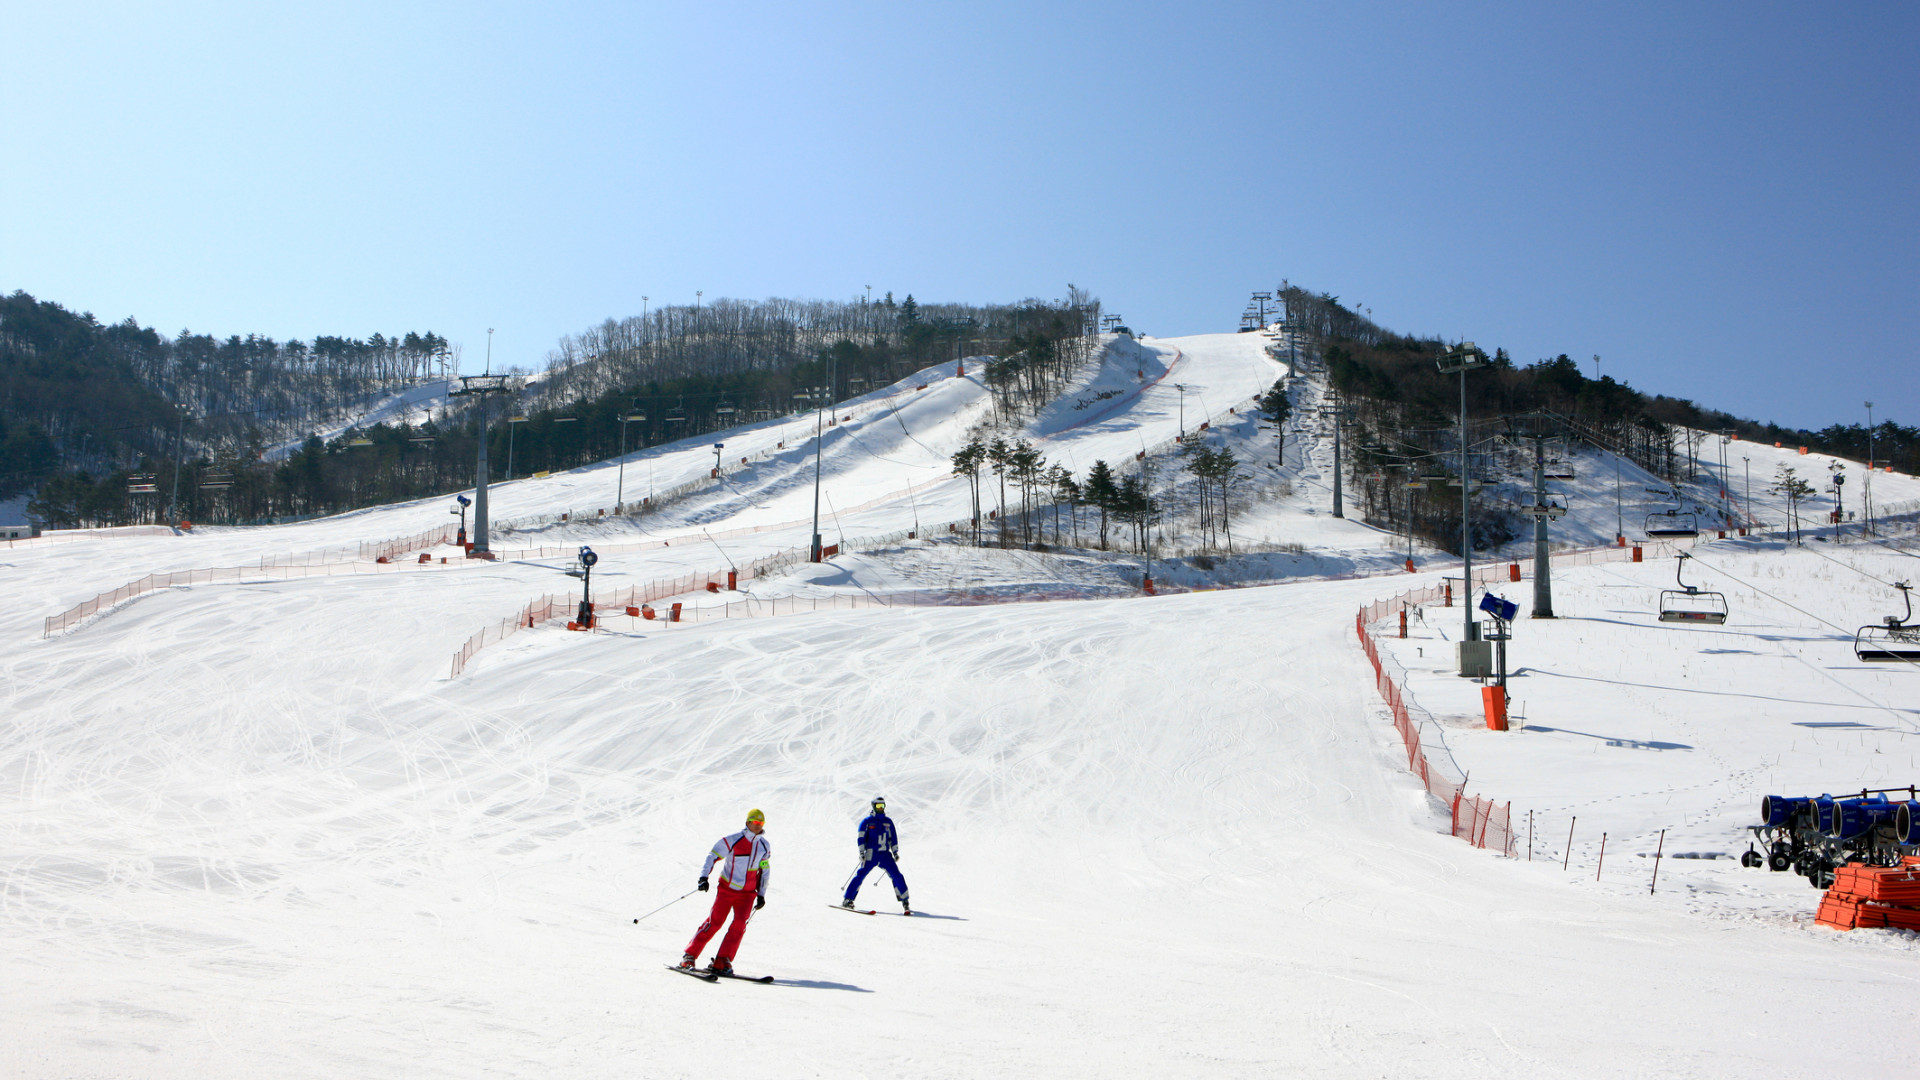 Skiing at Alpensia, the main base for outdoor events at the Pyeongchang Winter Olympics